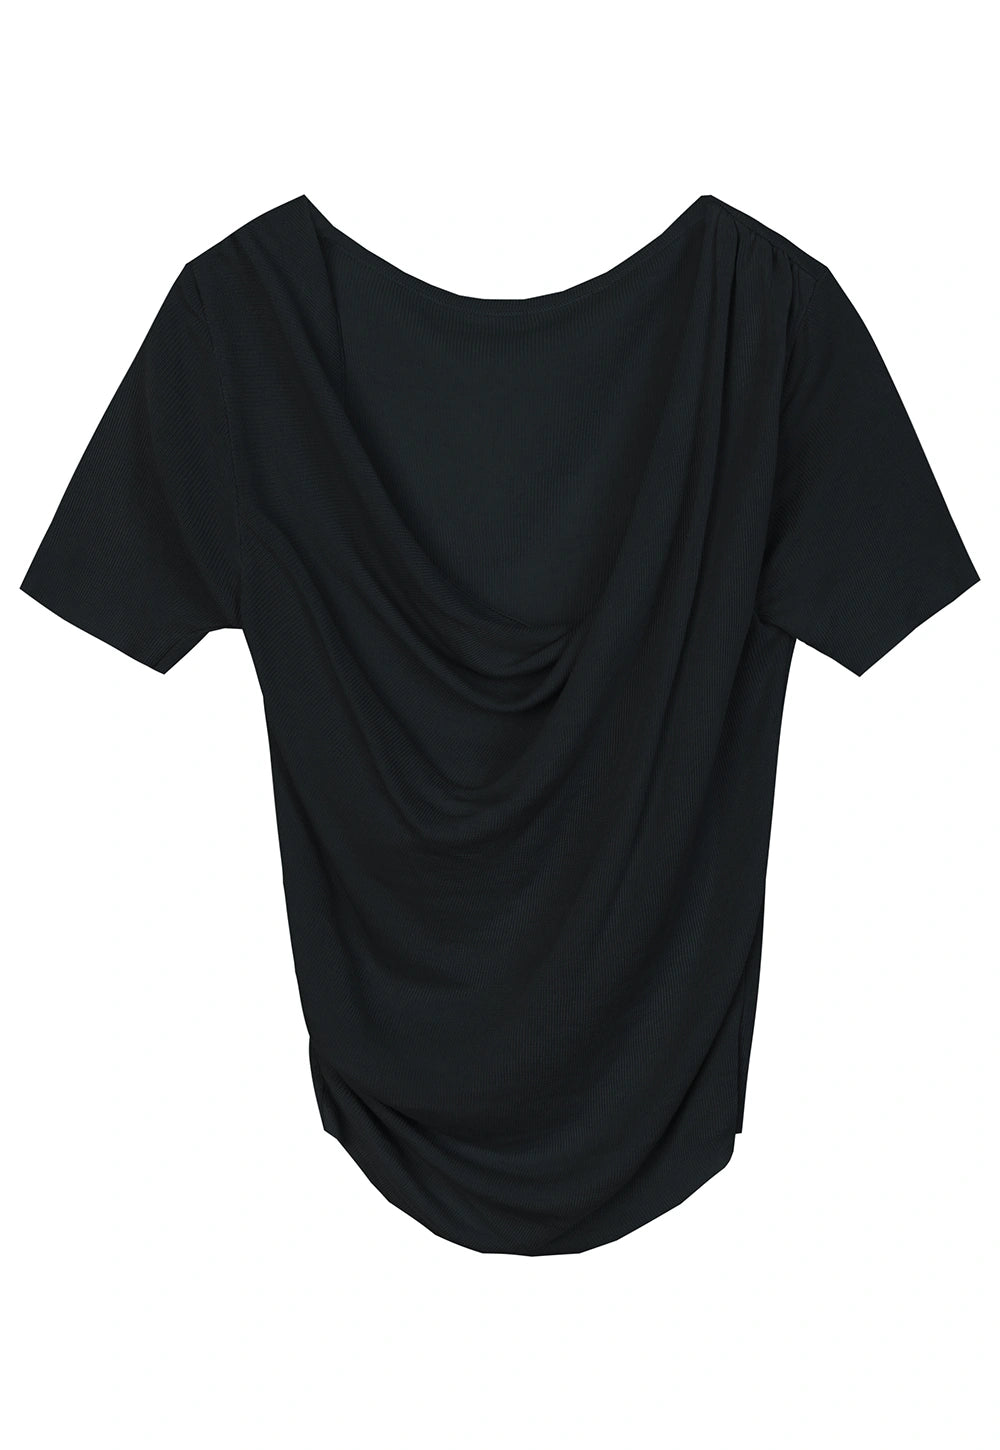 Women's Draped T-Shirt - Asymmetrical Neckline, Soft Fabric, Perfect for Elegant Casual Style